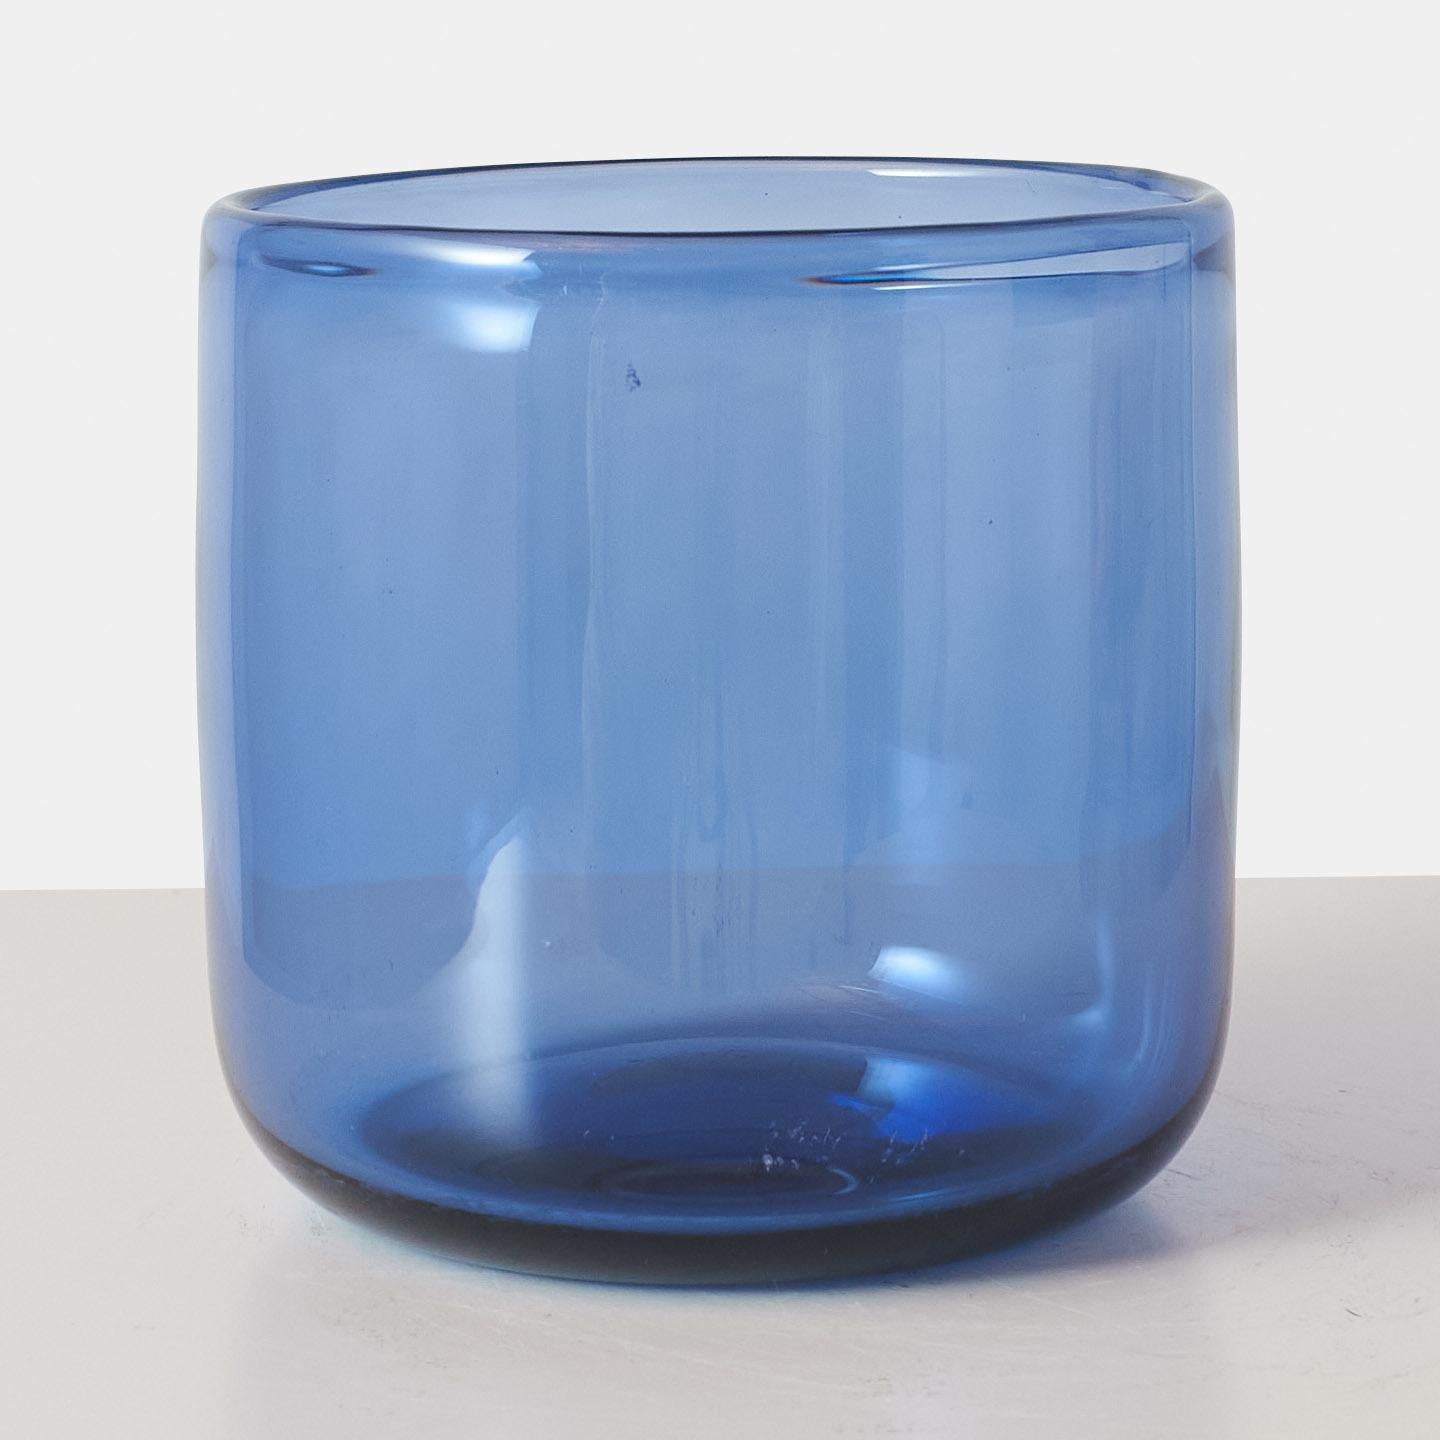 A sapphire blue high sided cylindrical vase by Per Lutken for Holmegaard. Some scuffing and light scratches, consistent with age and use. Not chips or cracks.